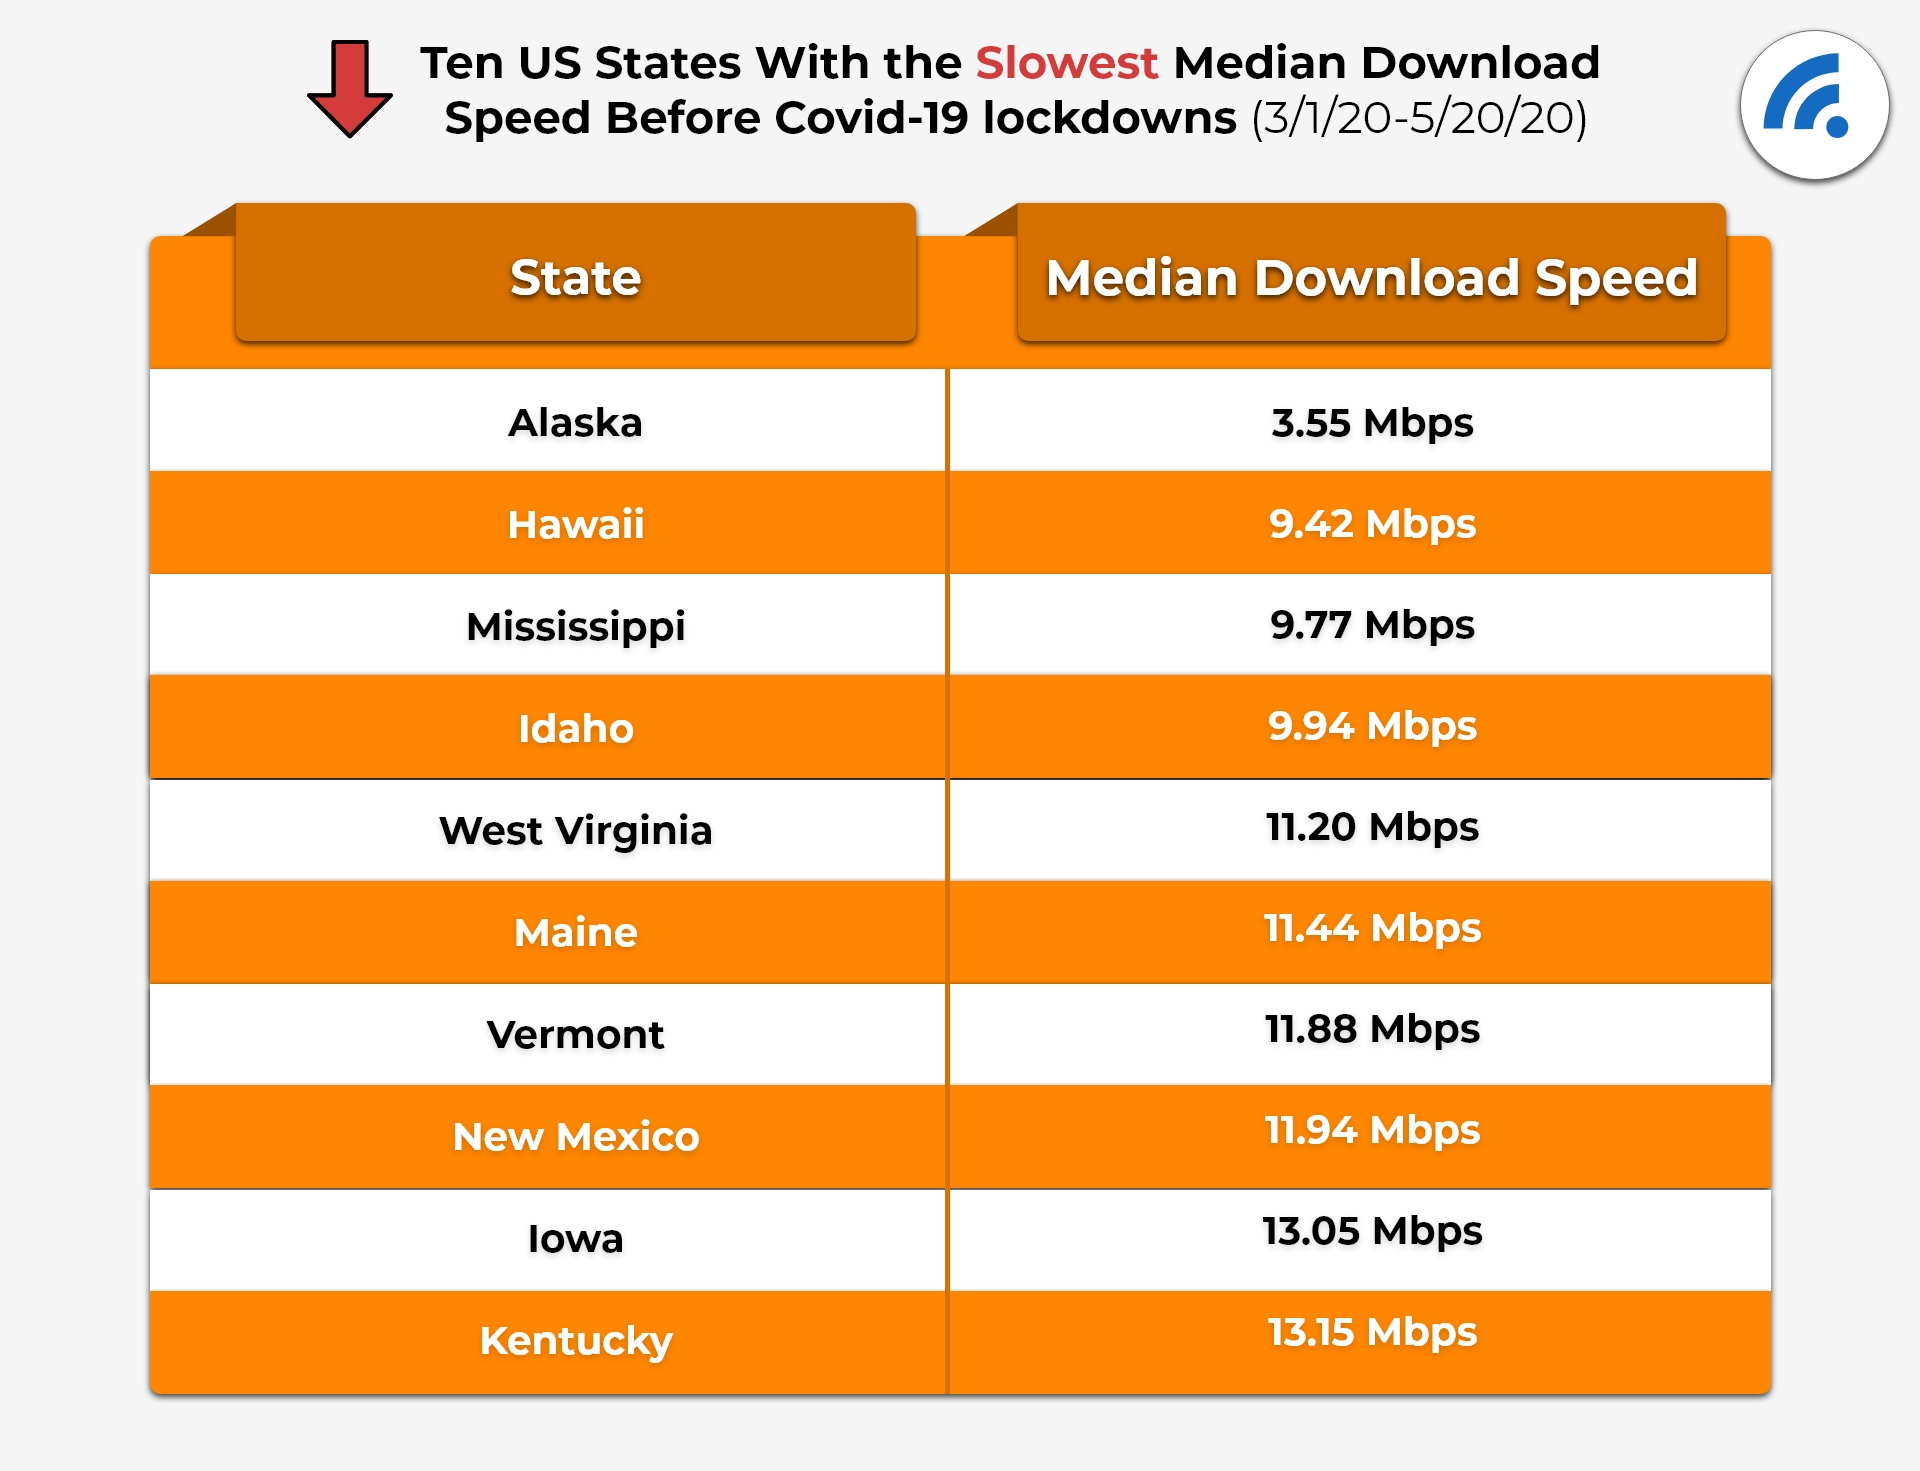 States With The Slowest Median Download Speeds Before COVID-19